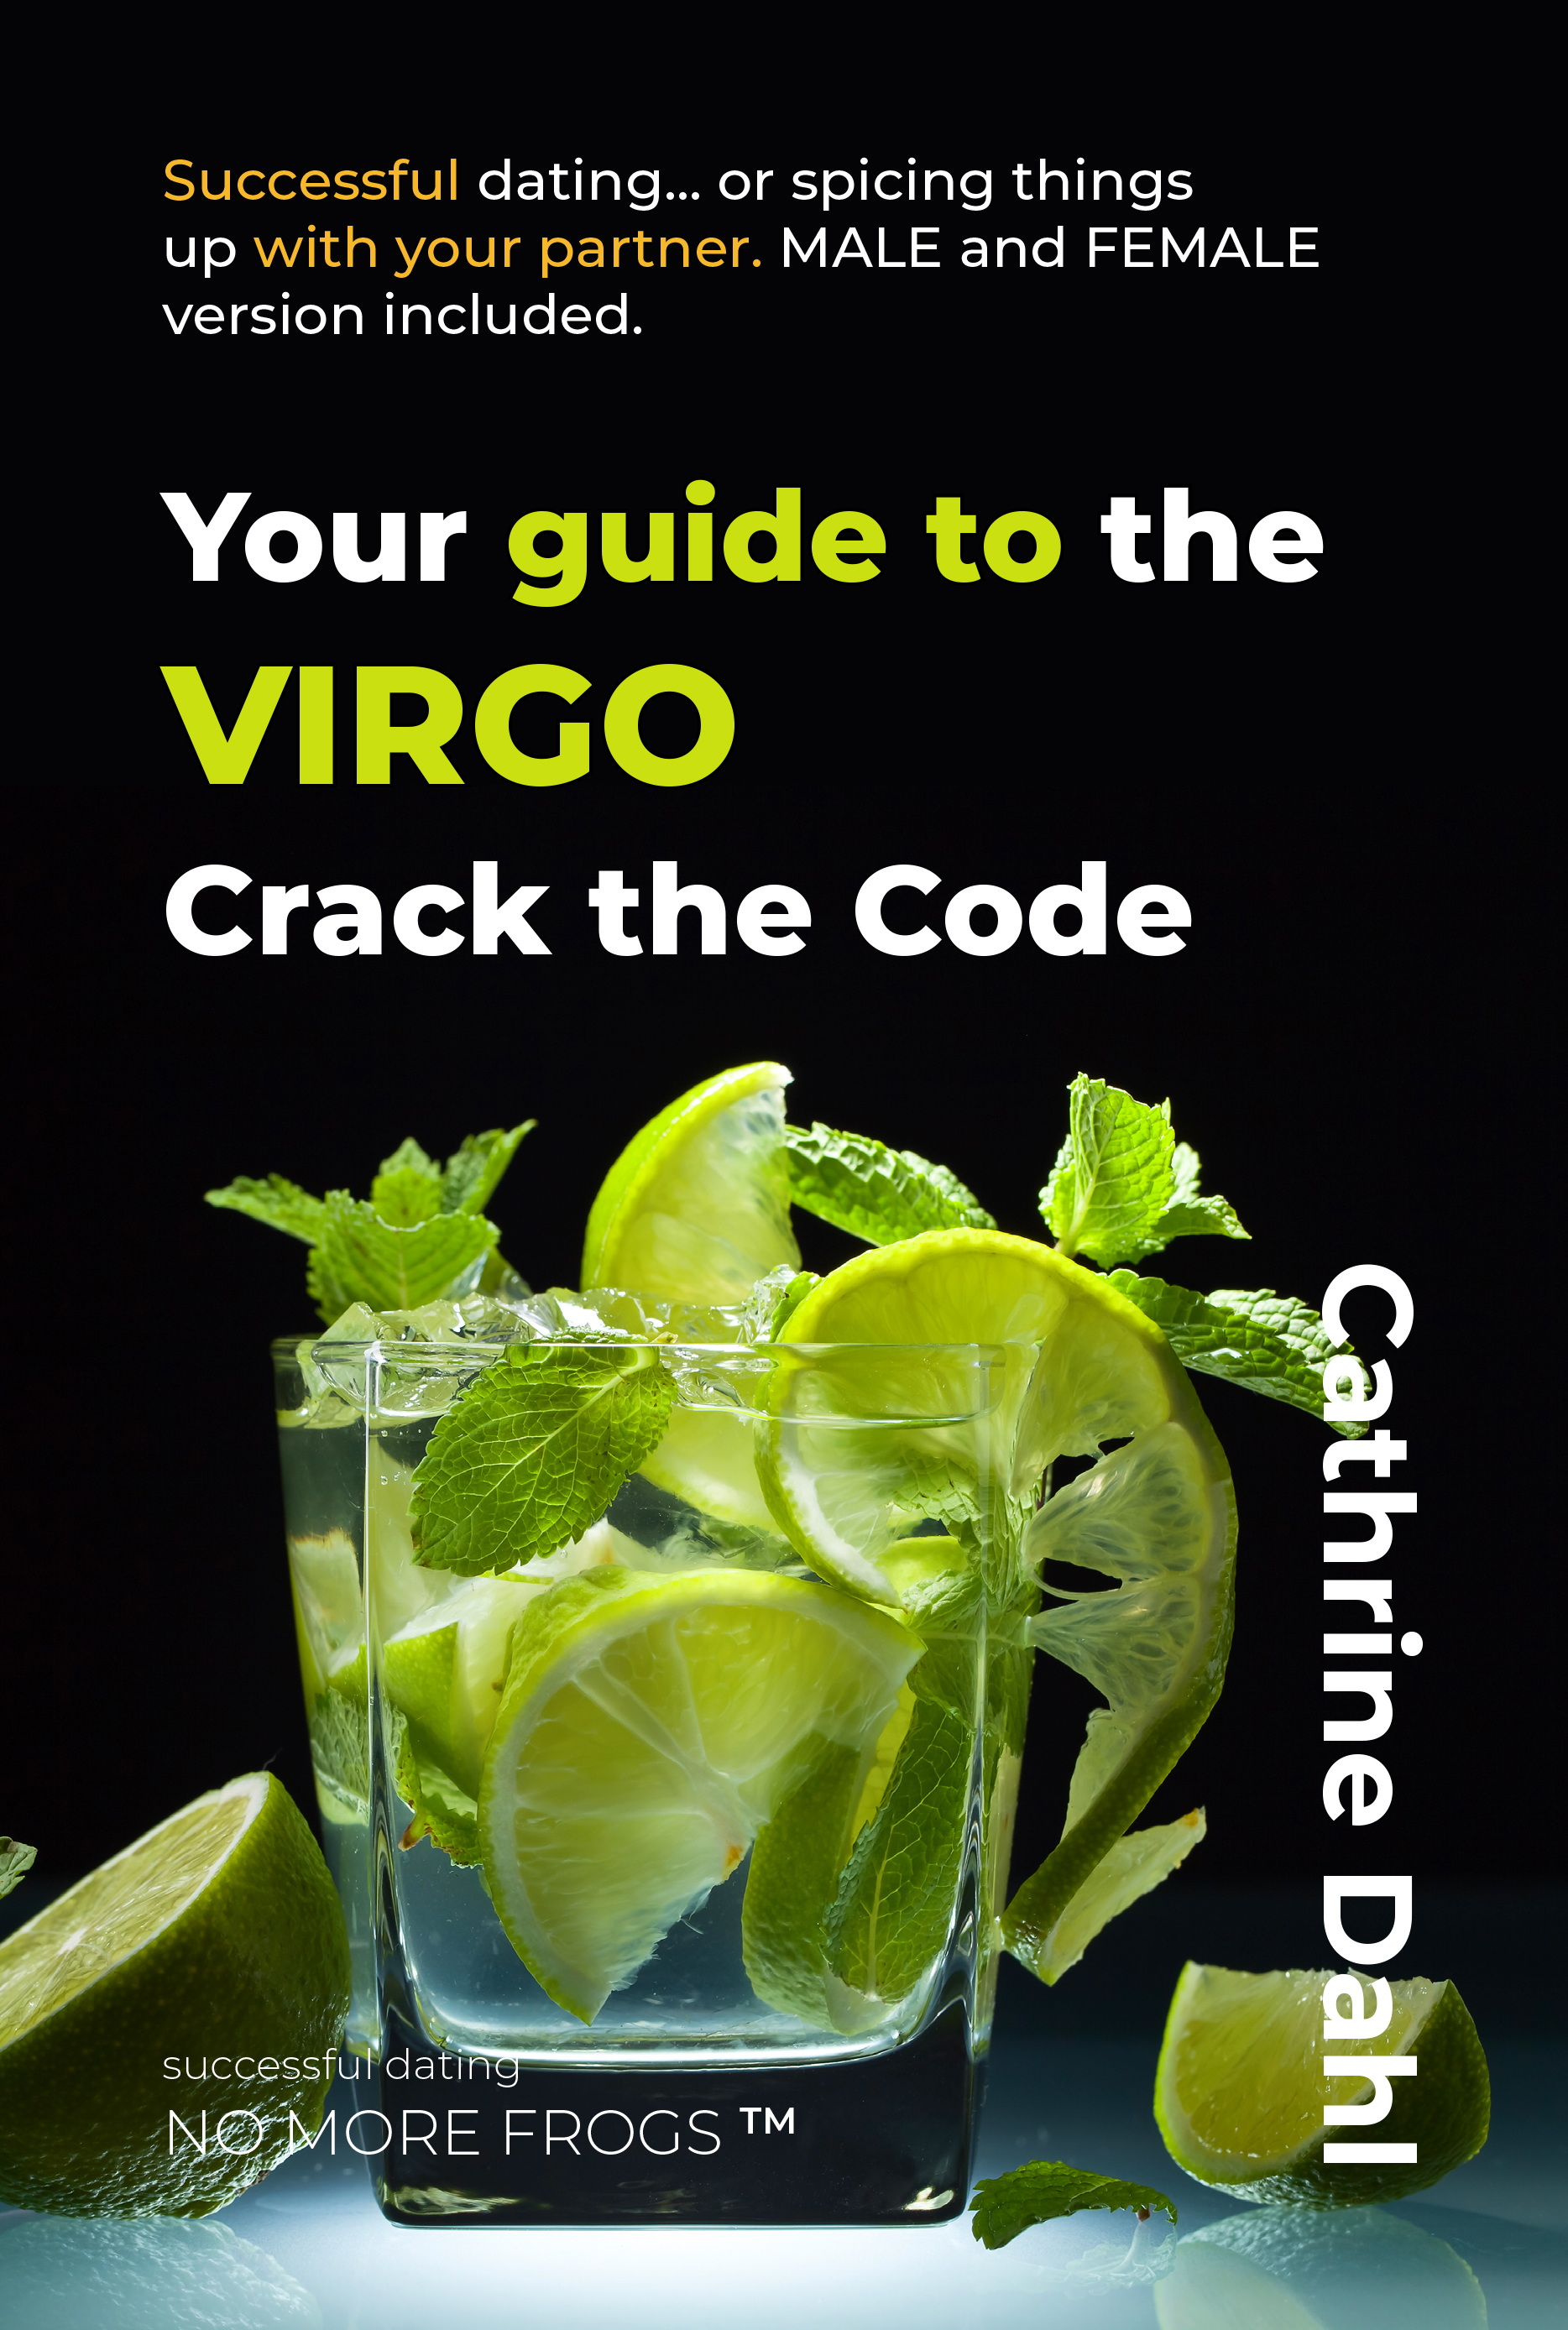 Dating or getting to know the Virgo man and the Virgo woman (Copy)